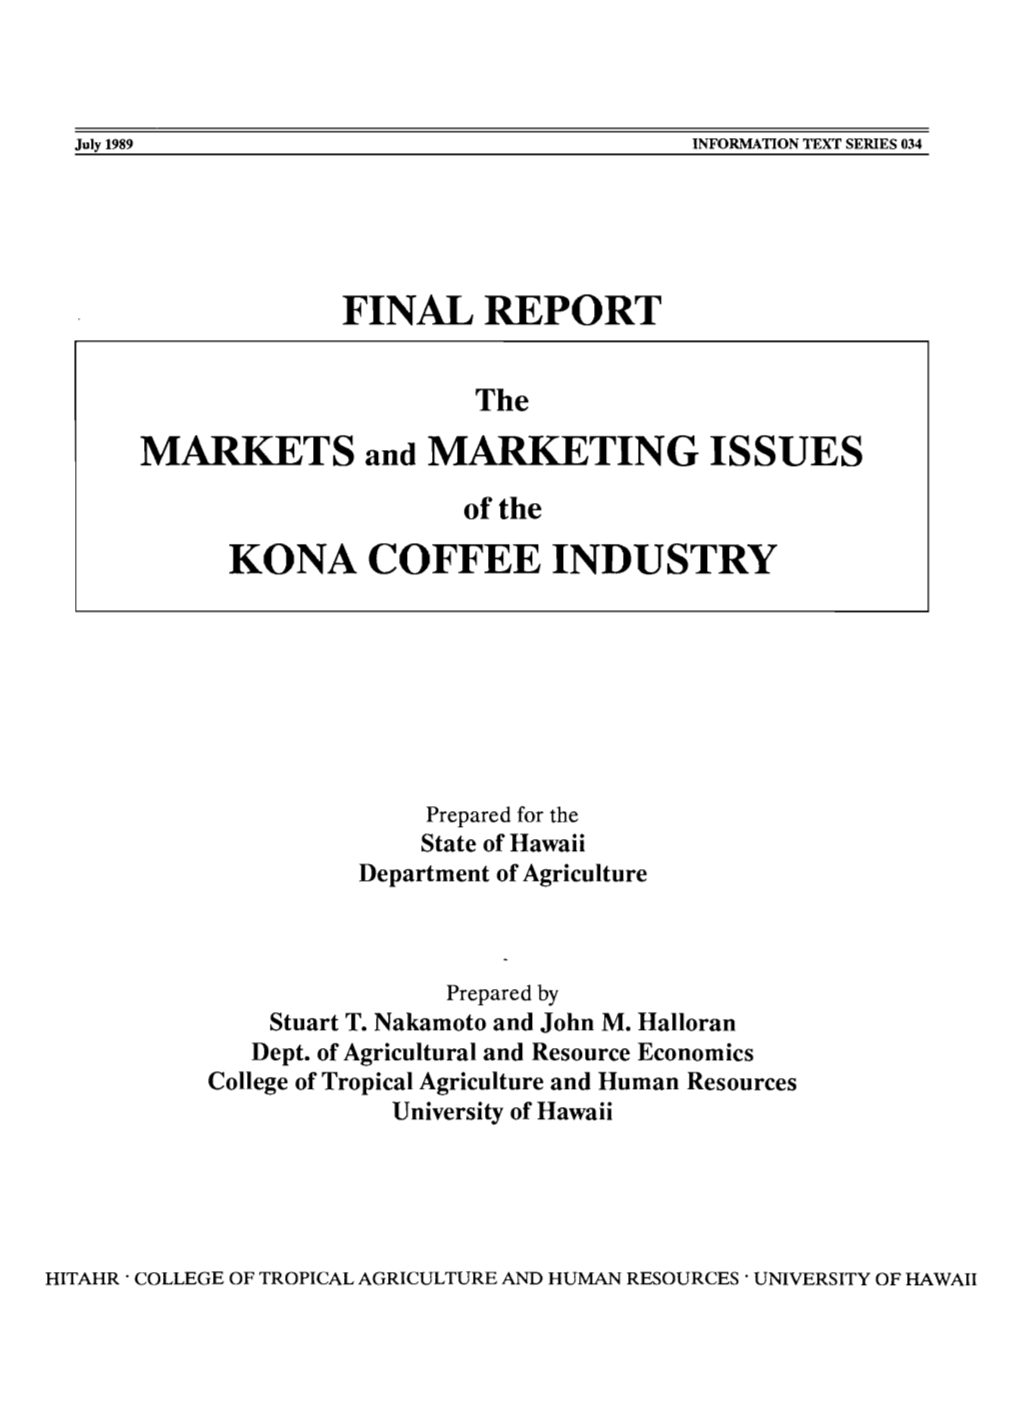 The MARKETS and MARKETING ISSUES of the KONA COFFEE INDUSTRY